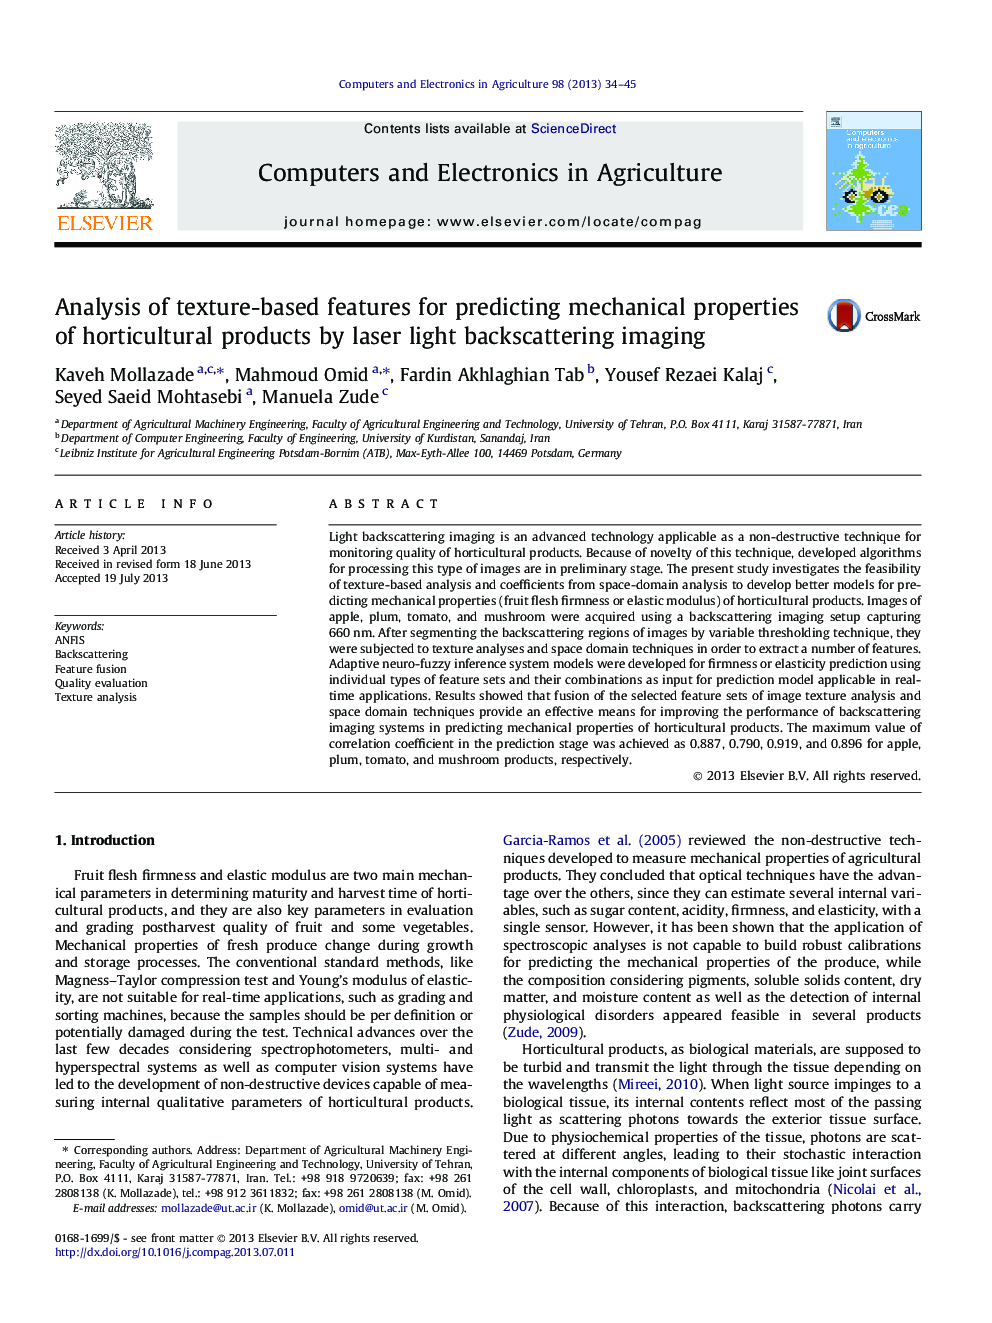 Analysis of texture-based features for predicting mechanical properties of horticultural products by laser light backscattering imaging